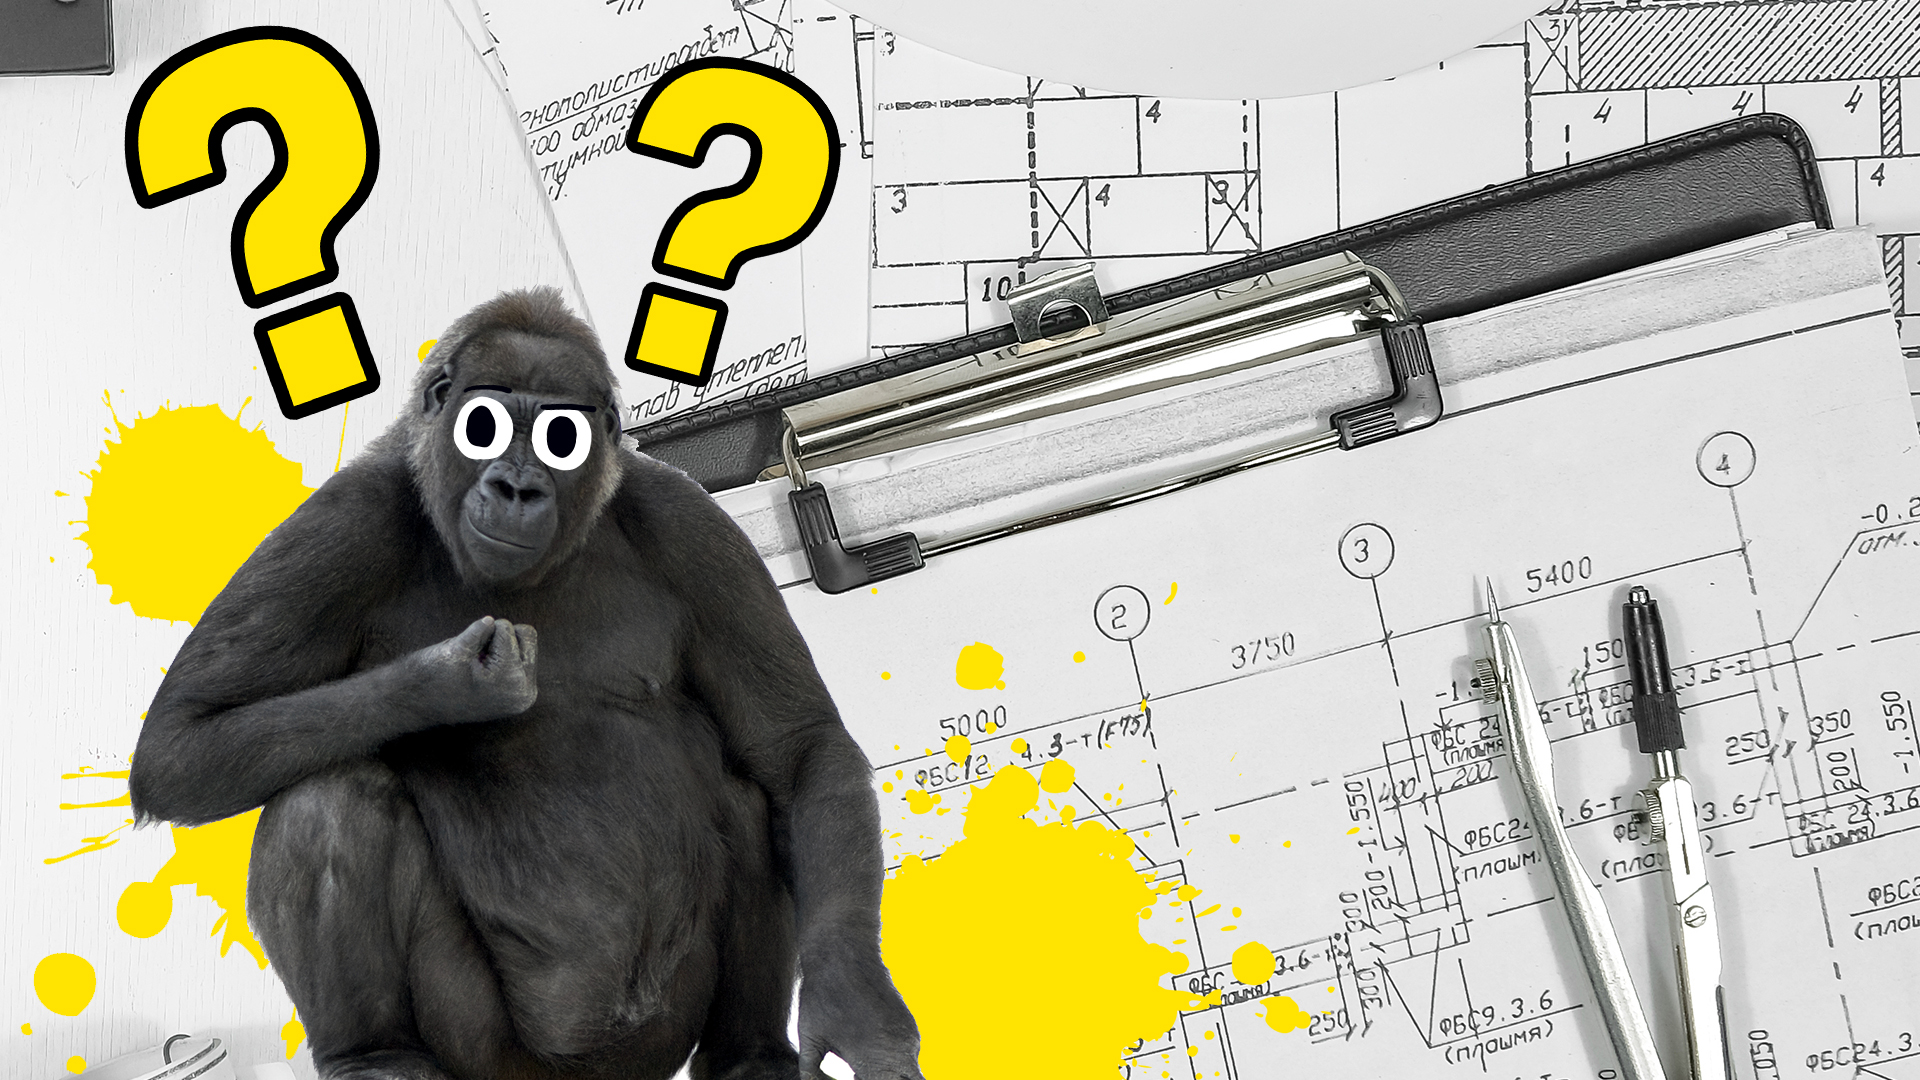 A gorilla in front of some architectural blueprints 